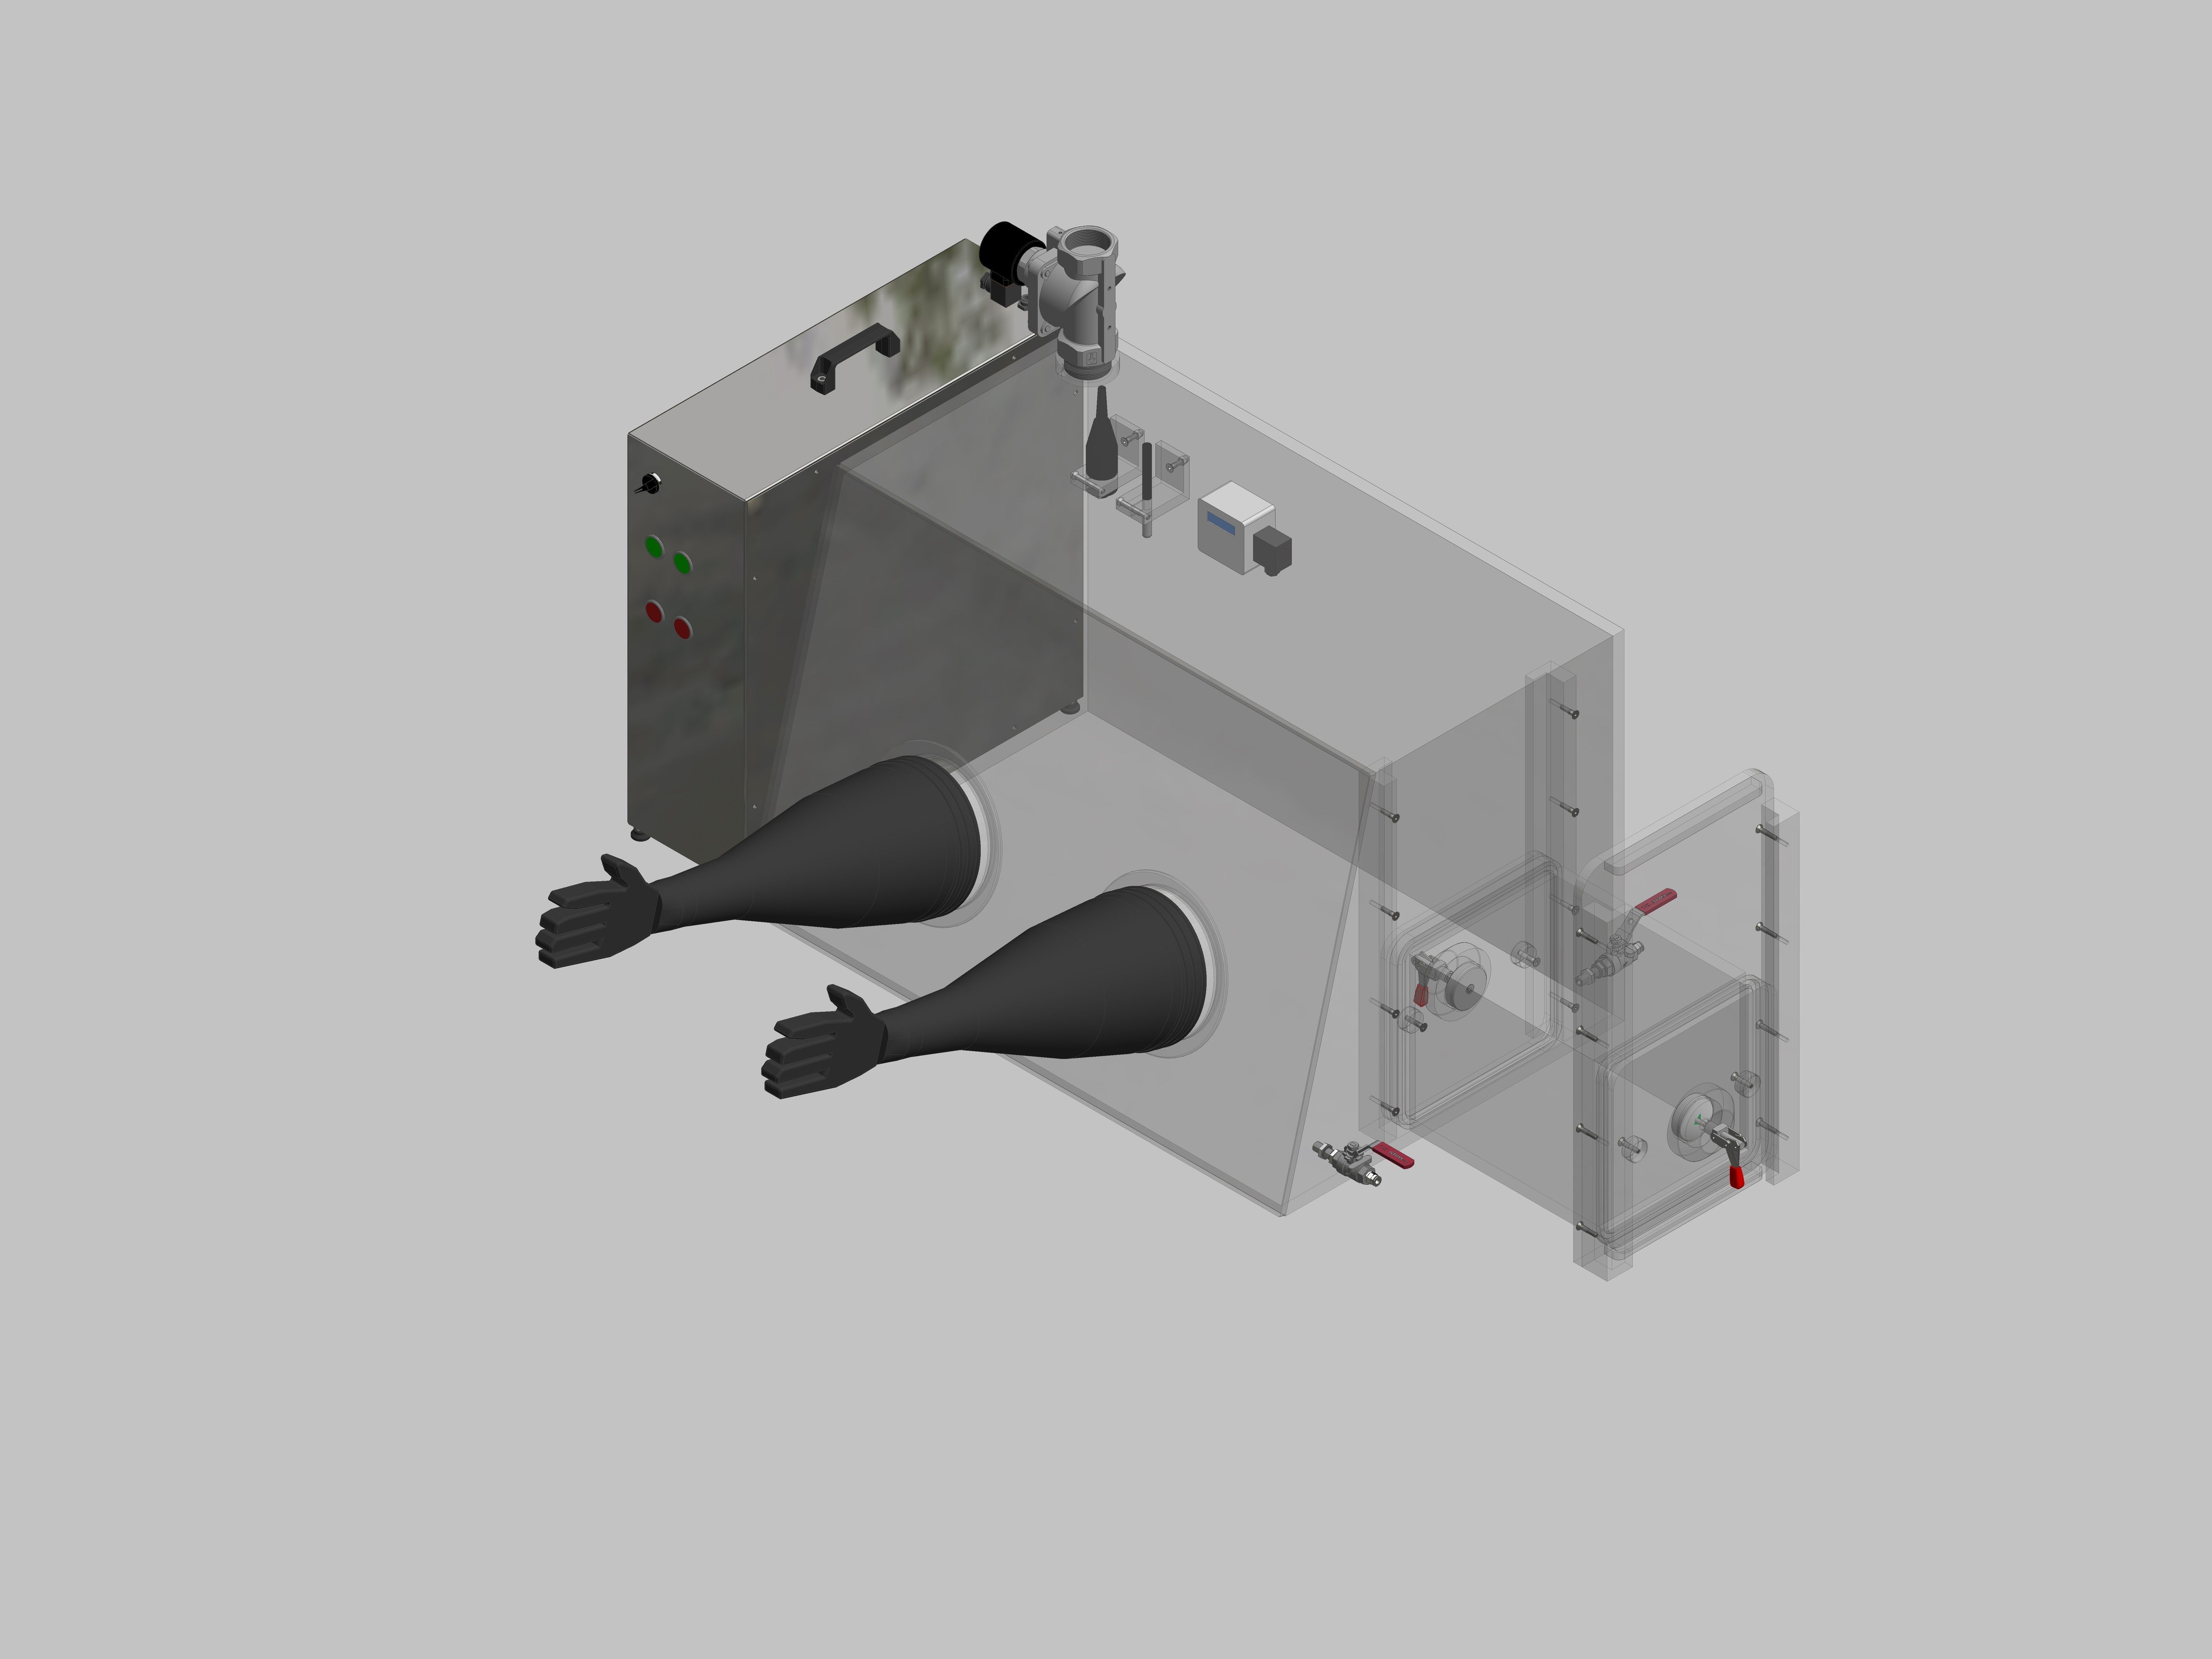 Glovebox made of acrylic&gt; Gas filling: automatic flushing with pressure control, front version: standard, side version: rectangular lock control: oxygen regulator with humidity display